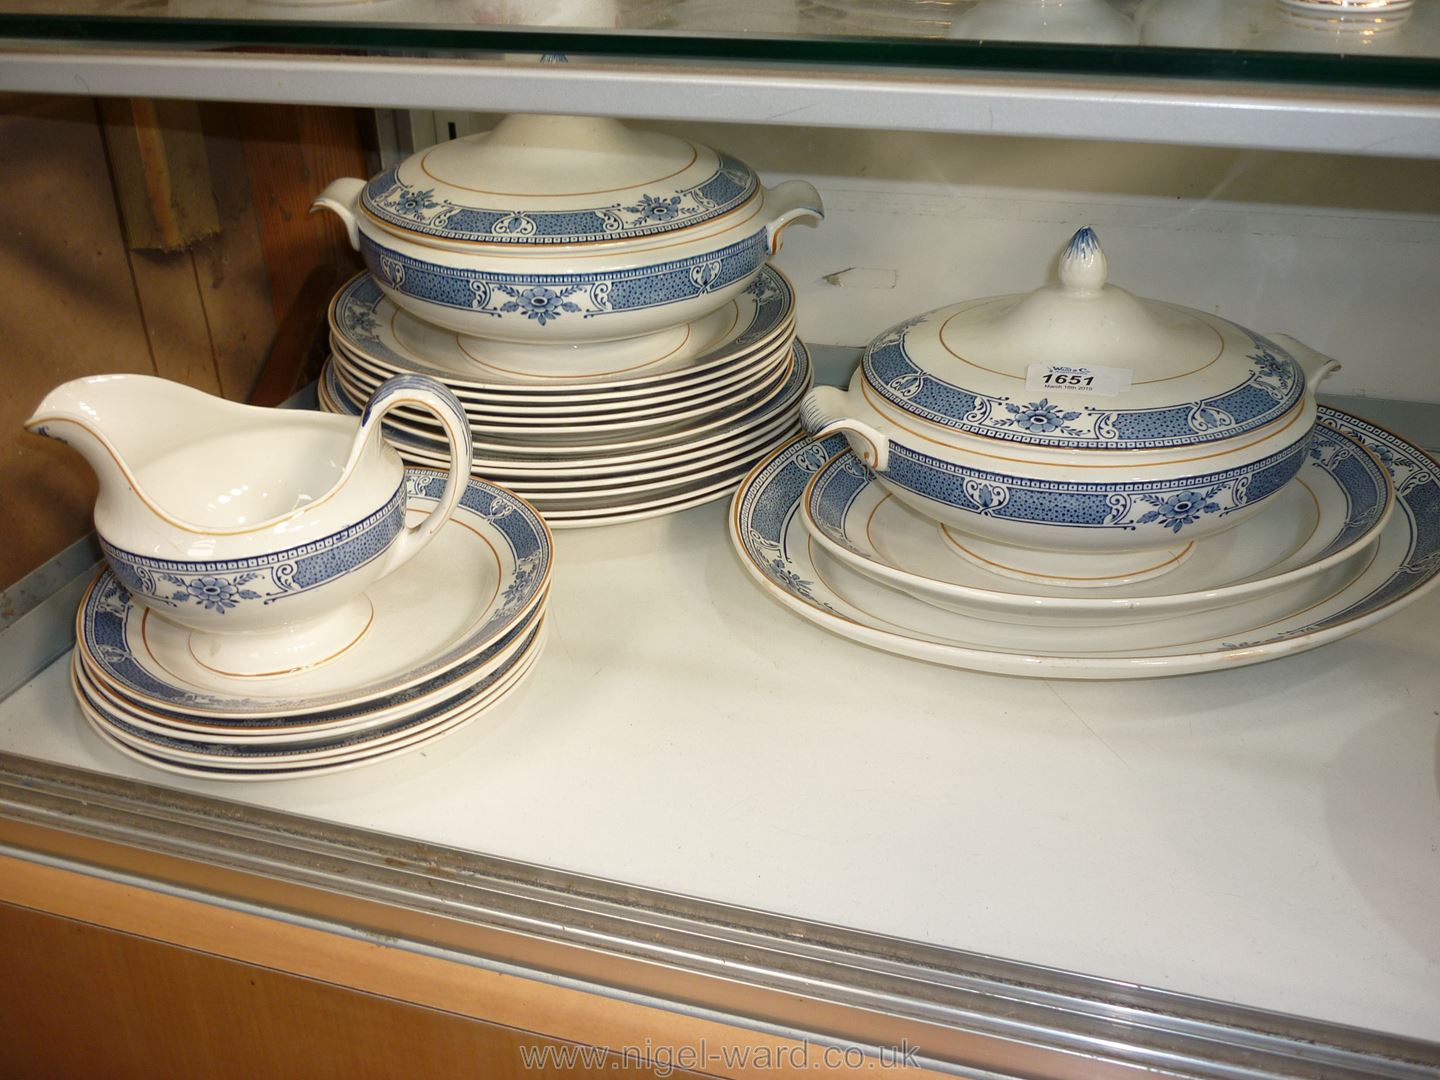 A quantity of Bristol 'Canynge' china including dinner plates, side plates,